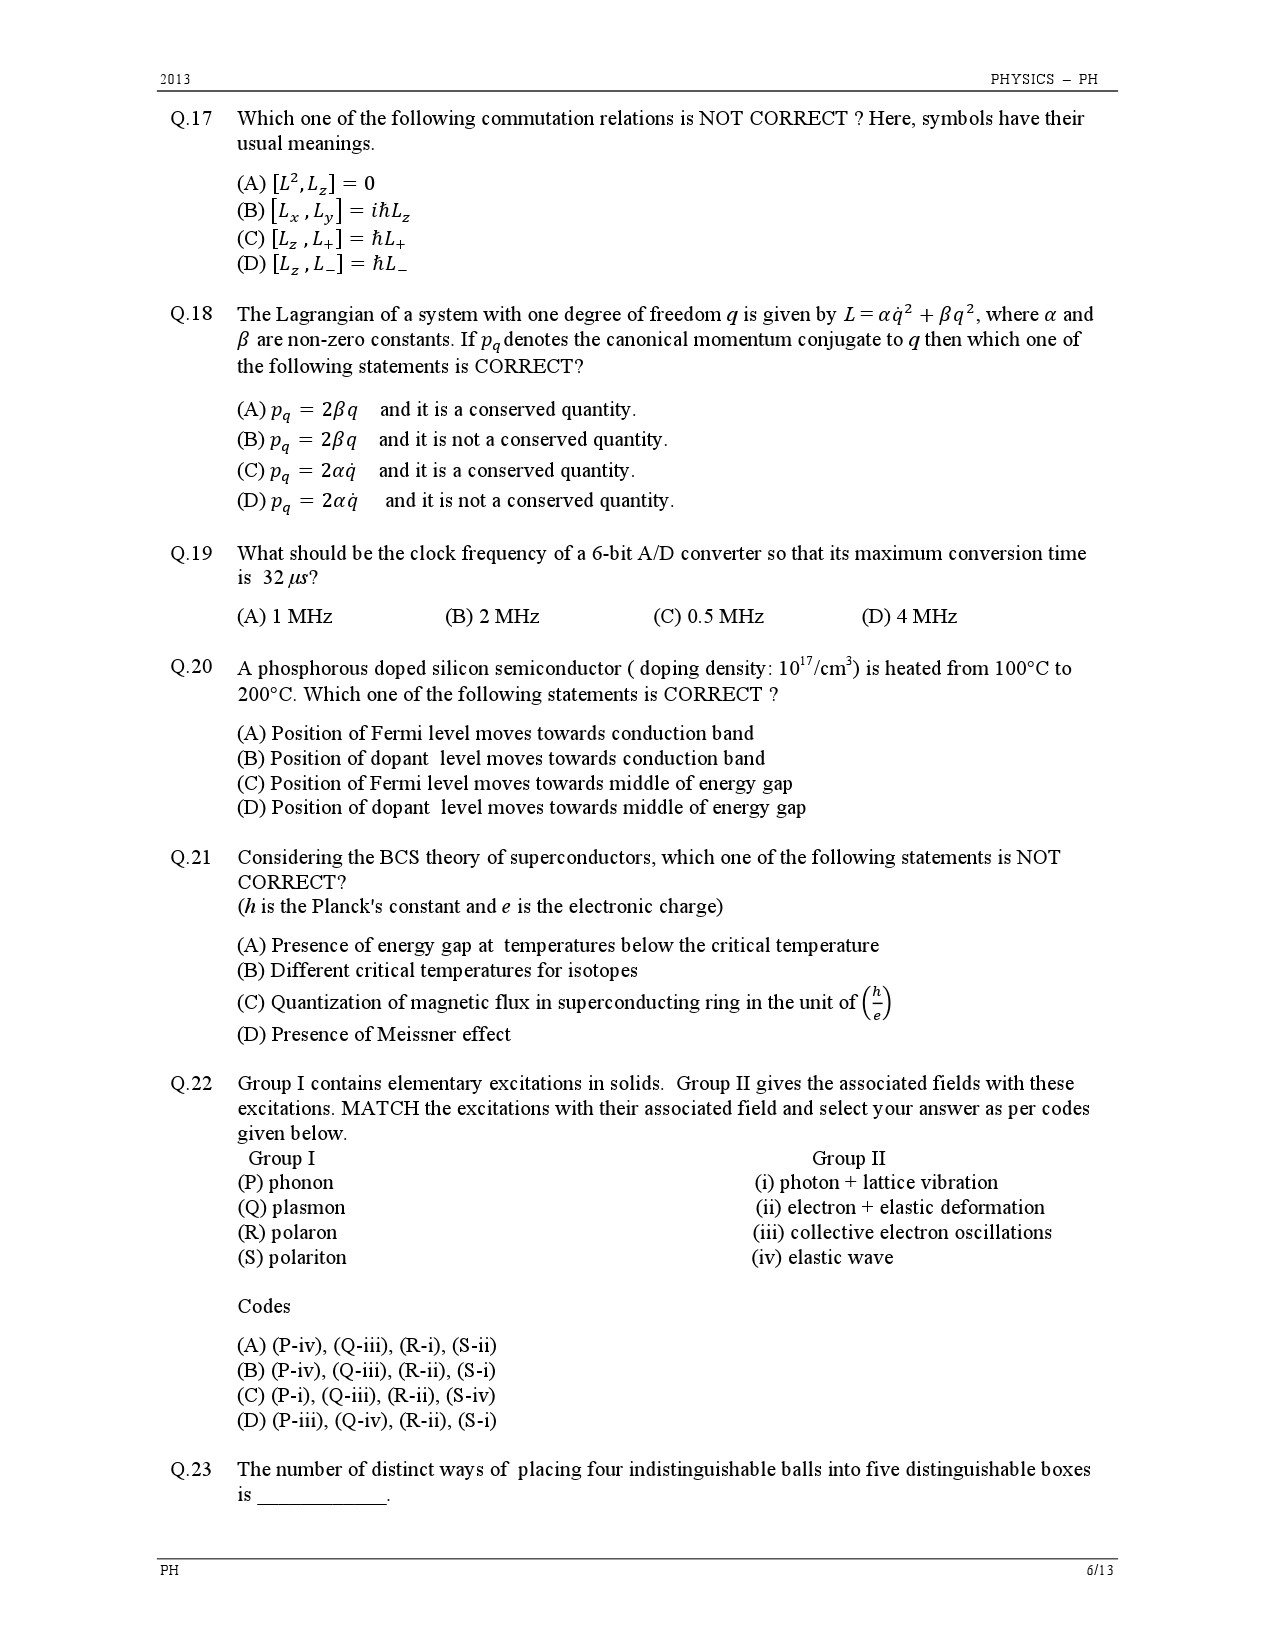 GATE Exam Question Paper 2013 Physics 6